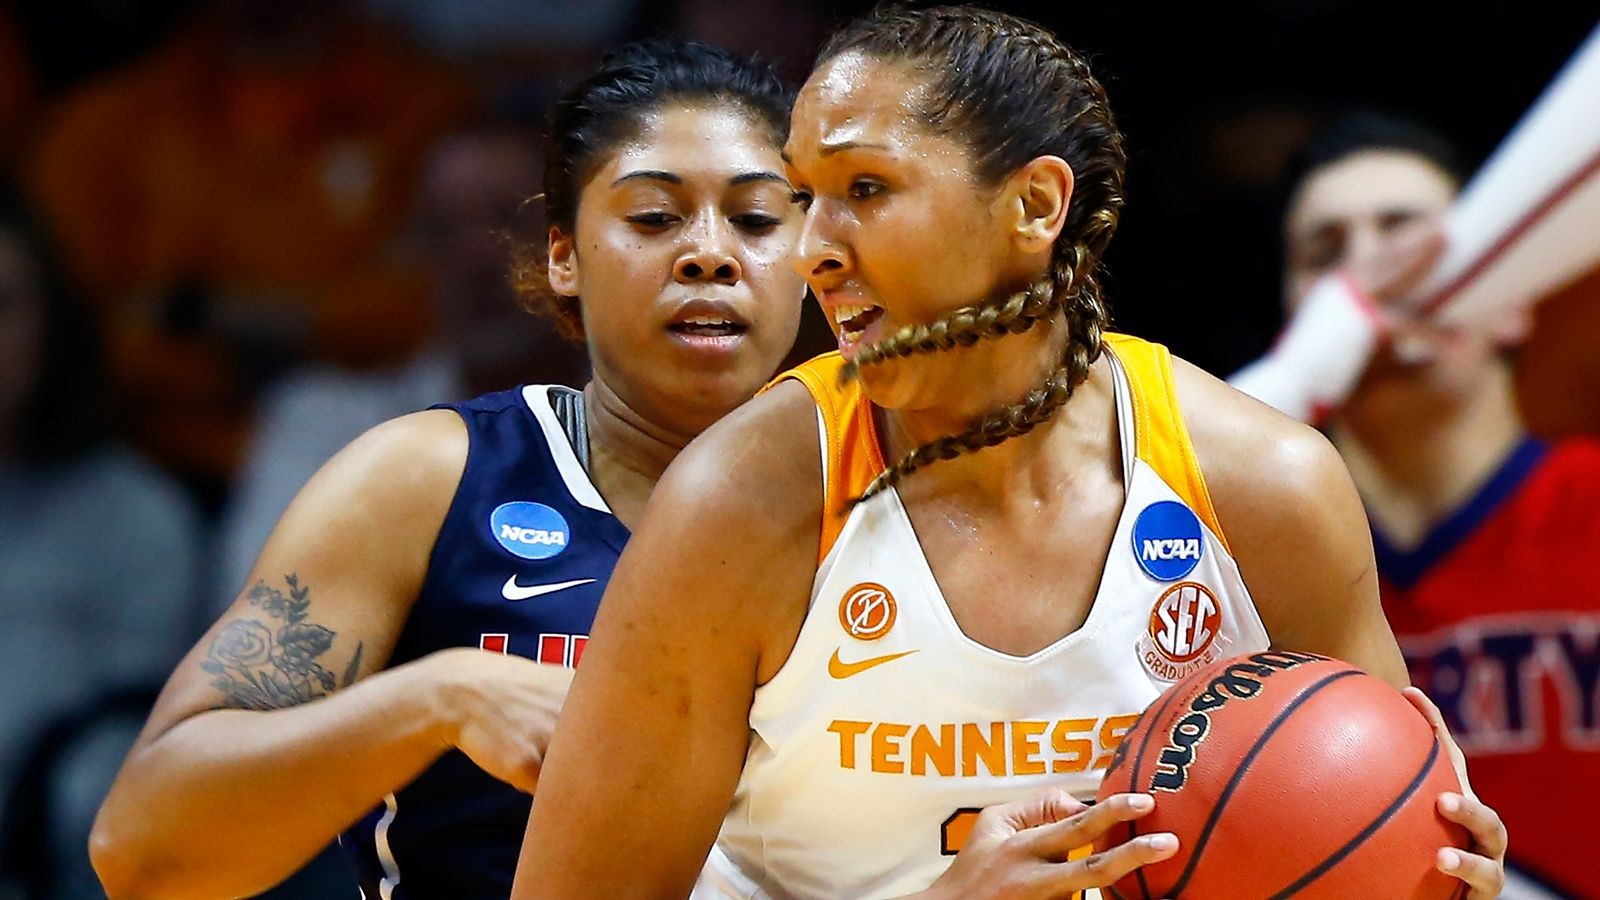 Strong Second Half Lifts Lady Vols To First Round Win